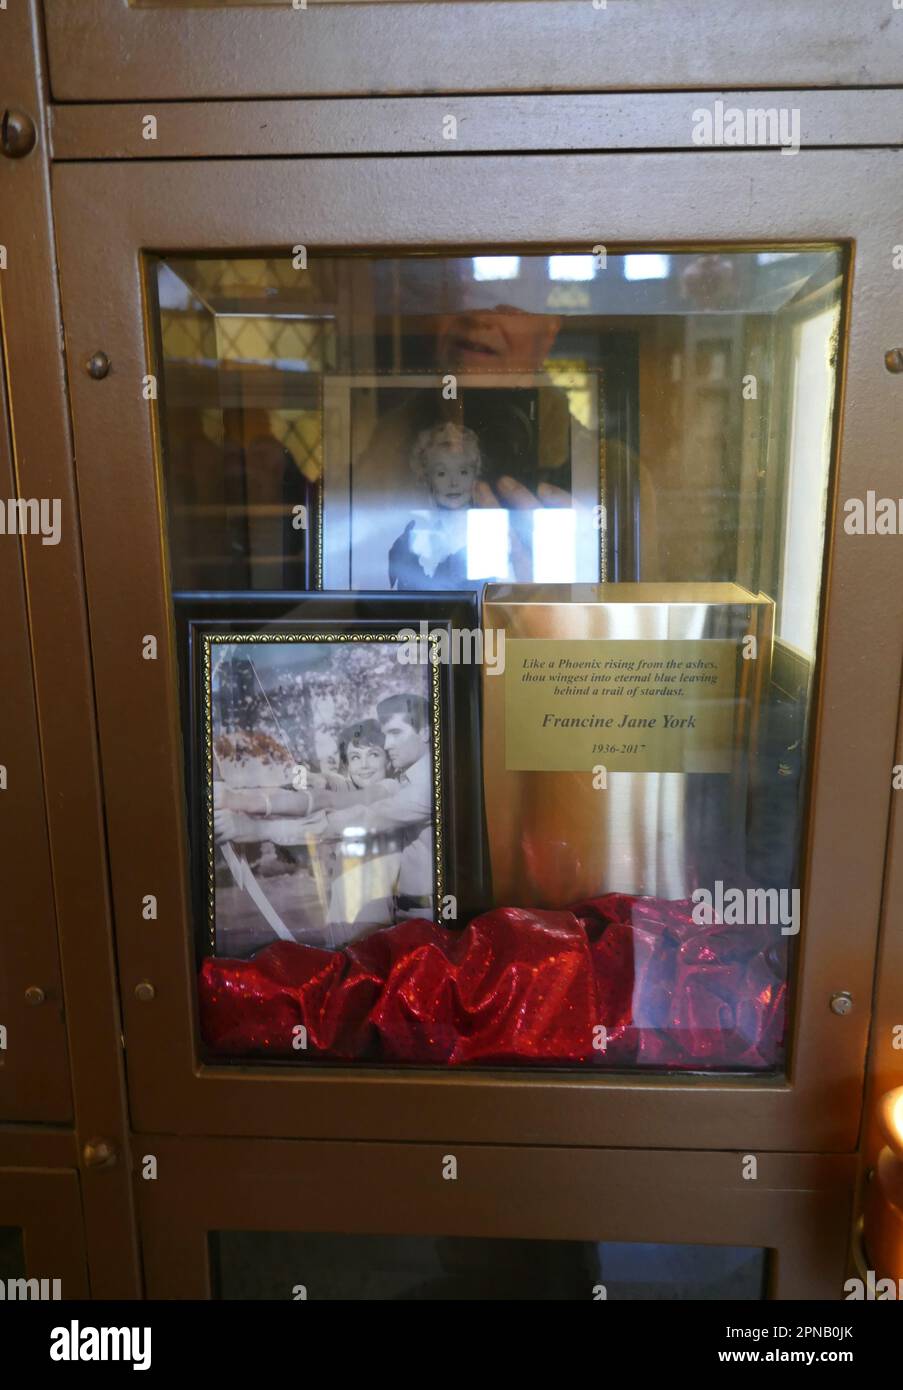 Los Angeles, California, USA 16th April 2023 Actress Francine York Grave in Chapel Columbarium at Hollywood Forever Cemetery on April 16, 2023 in Los Angeles, California, USA. Photo by Barry King/Alamy Stock Photo Stock Photo